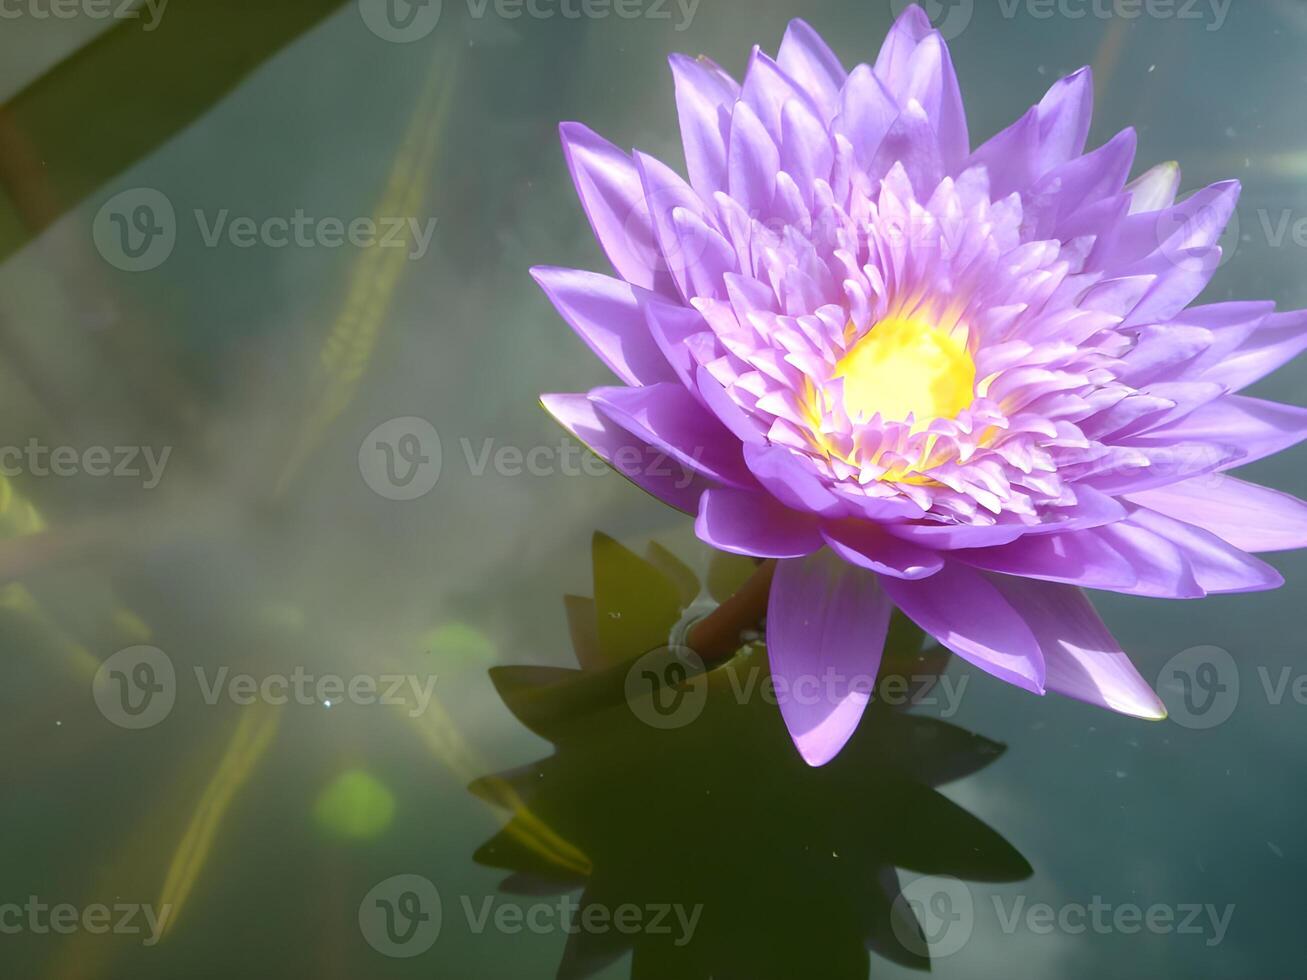 Purple lotus flower - Water lily blossoming in garden pond photo